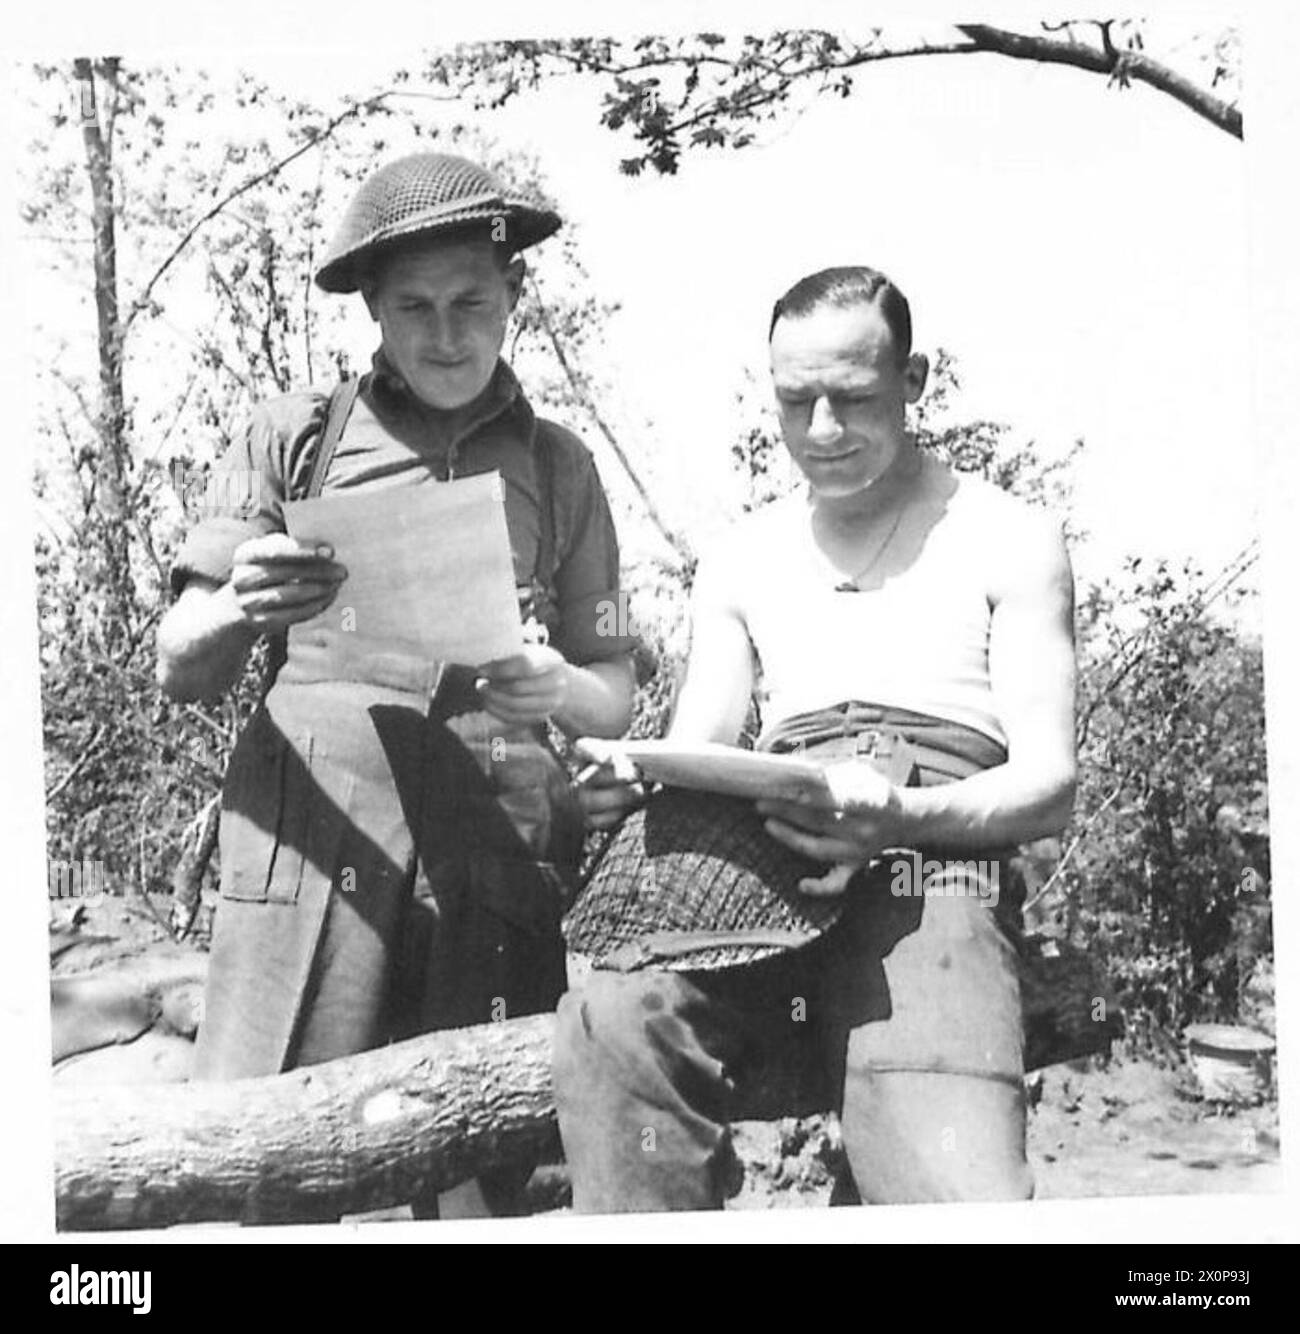 FIFTH ARMY : ANZIO BRIDGEHEAD - VARIOUS - - Sgt. T. Hodder (left) of 66 Marville Road, Fulham, S.W.6 and Sgt. H. Hastings of 32 Culpepper Street, Finsbury, London, N.l. reading the local paper, a duplicated sheet called 'The Beachead News'. It contains the BBC news report, and full reports of local patrol activity. Photographic negative , British Army Stock Photo